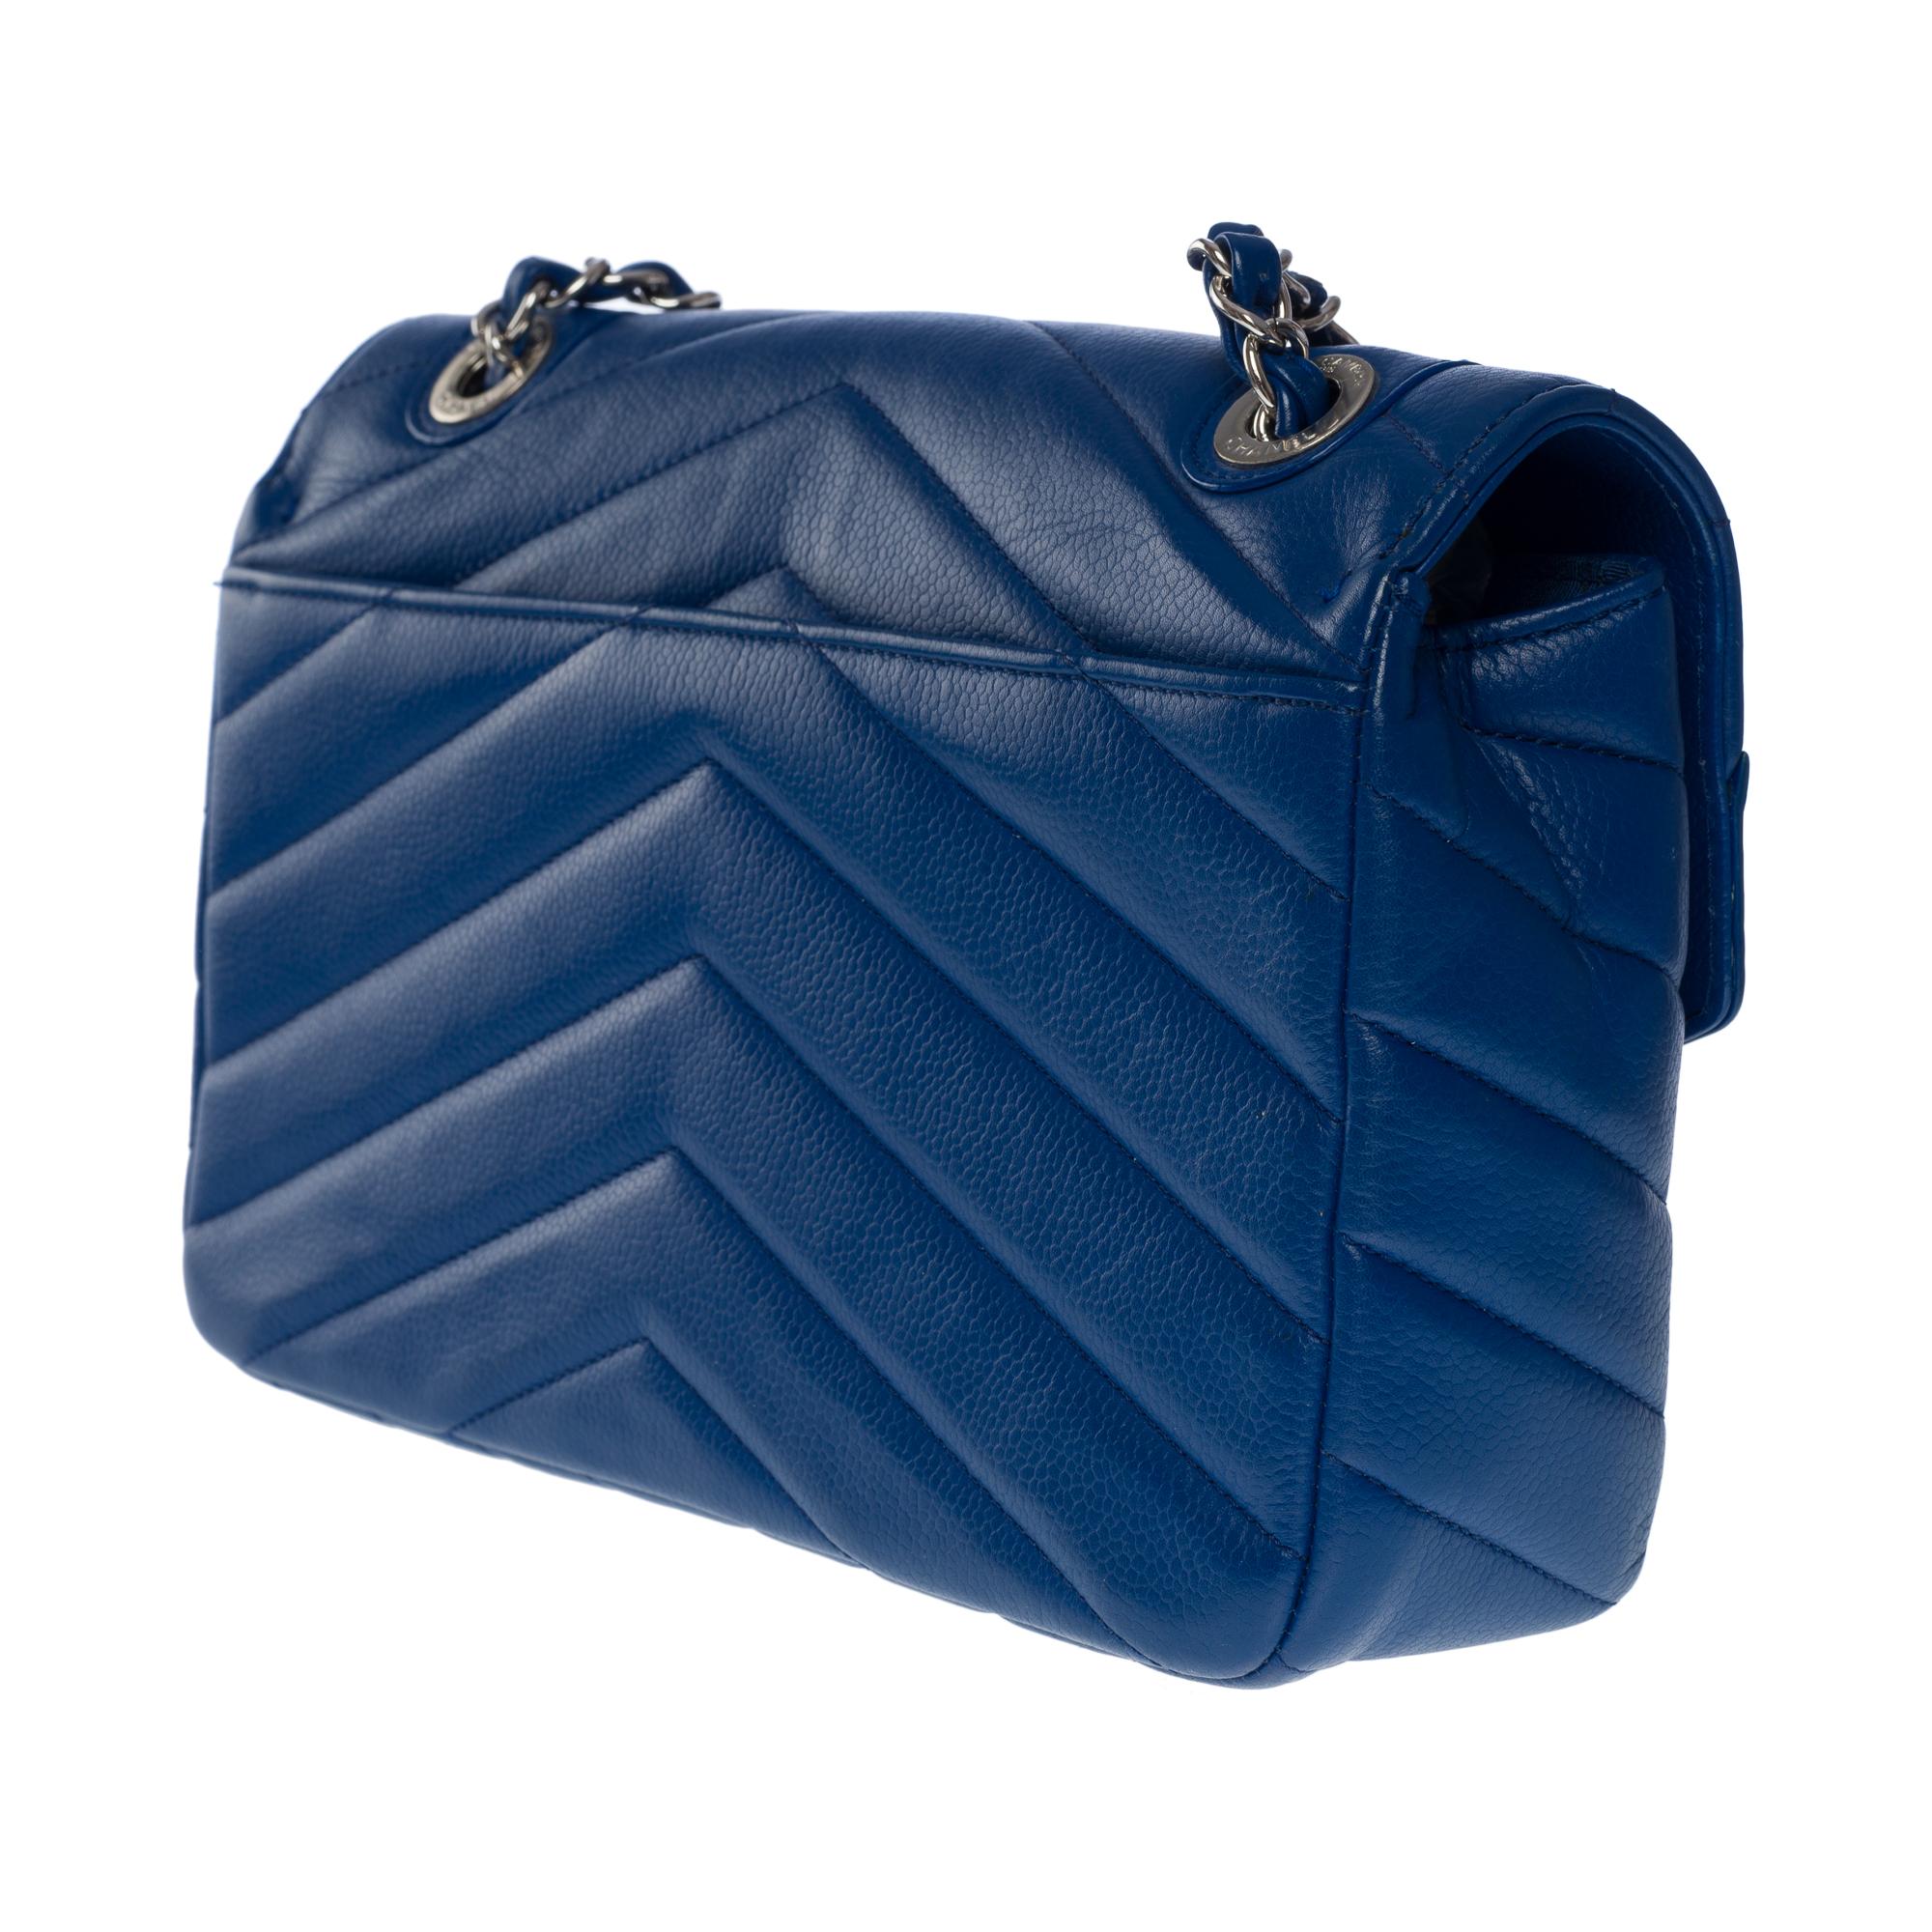 Chanel Classic shoulder flap bag in blue herringbone quilted caviar leather, SHW For Sale 1